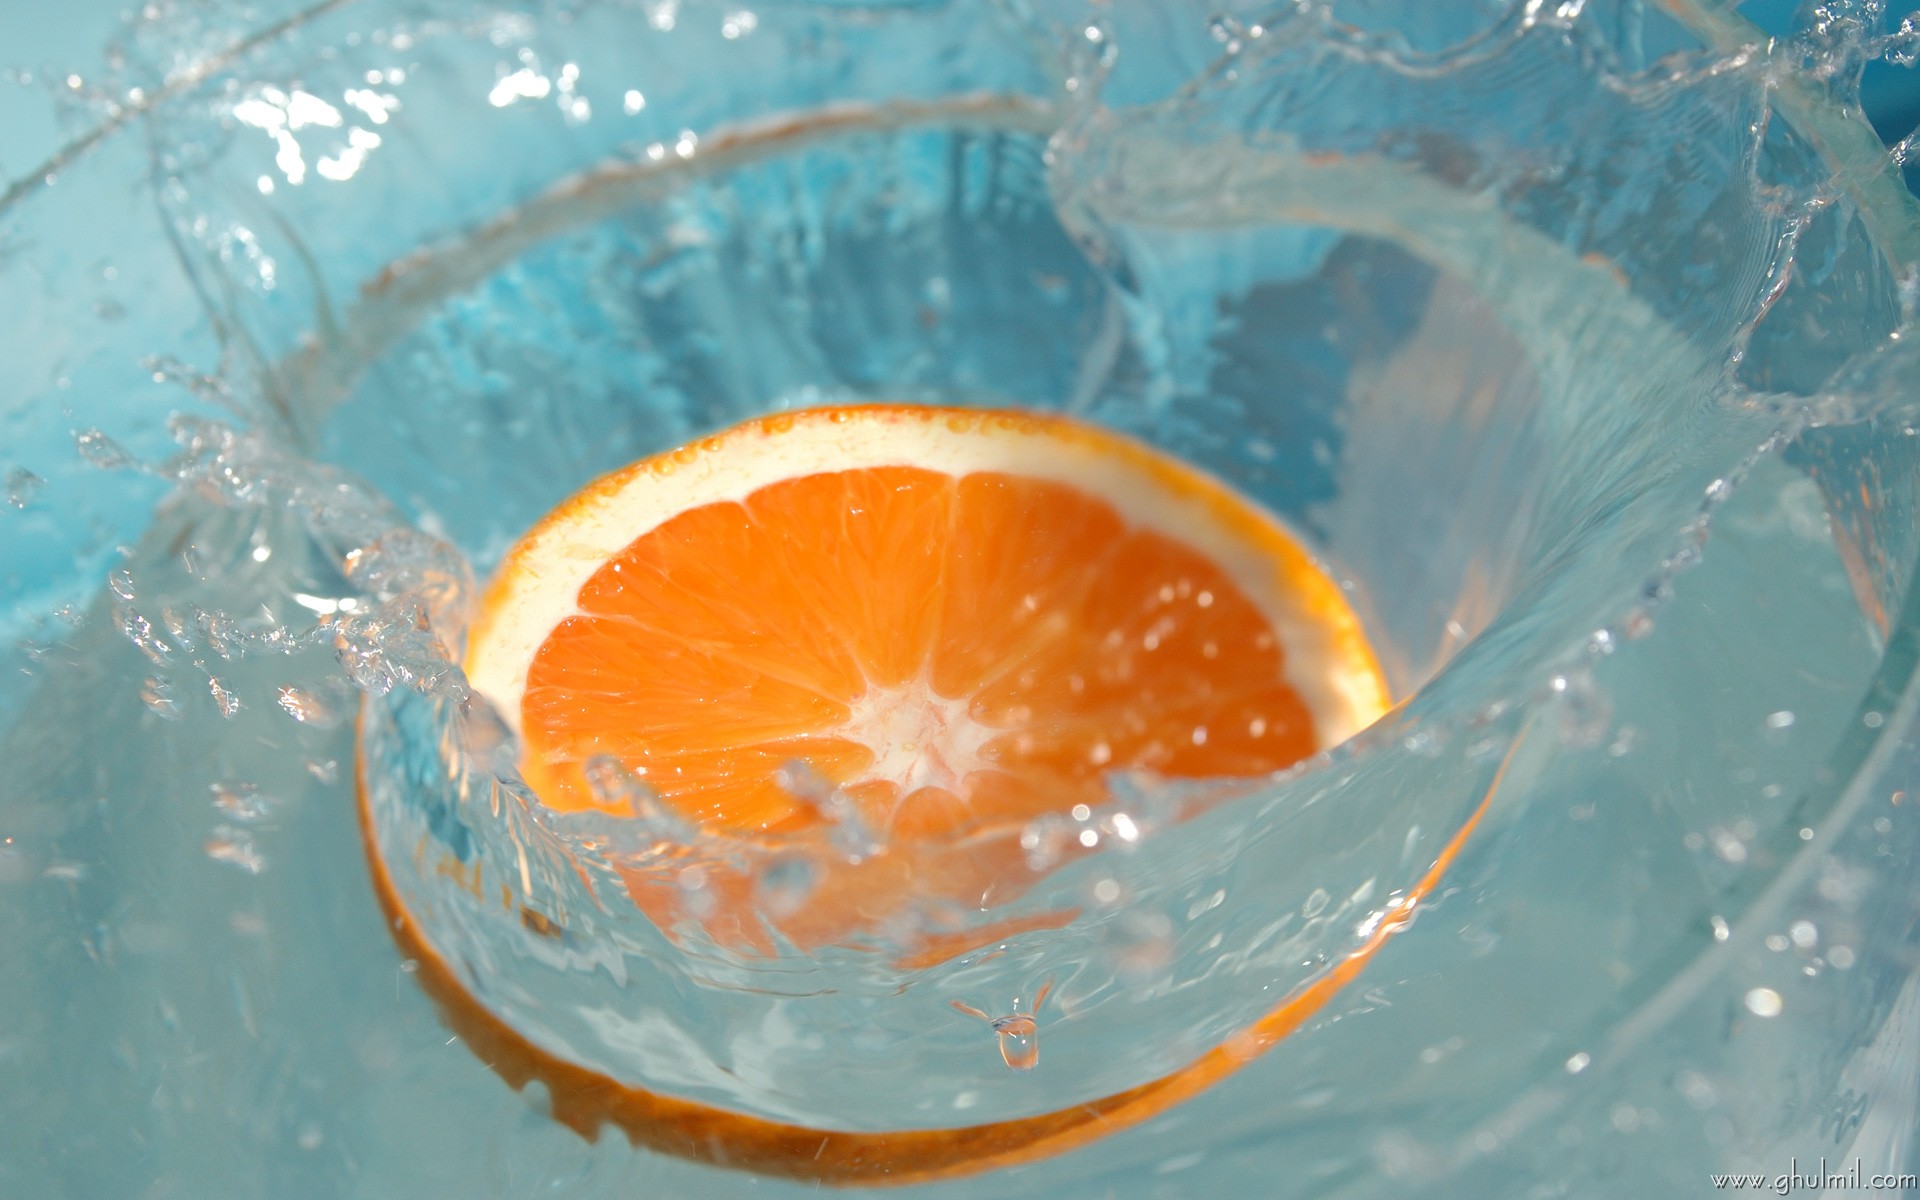  wallpapershigh resolution high quality orange slice in water hd